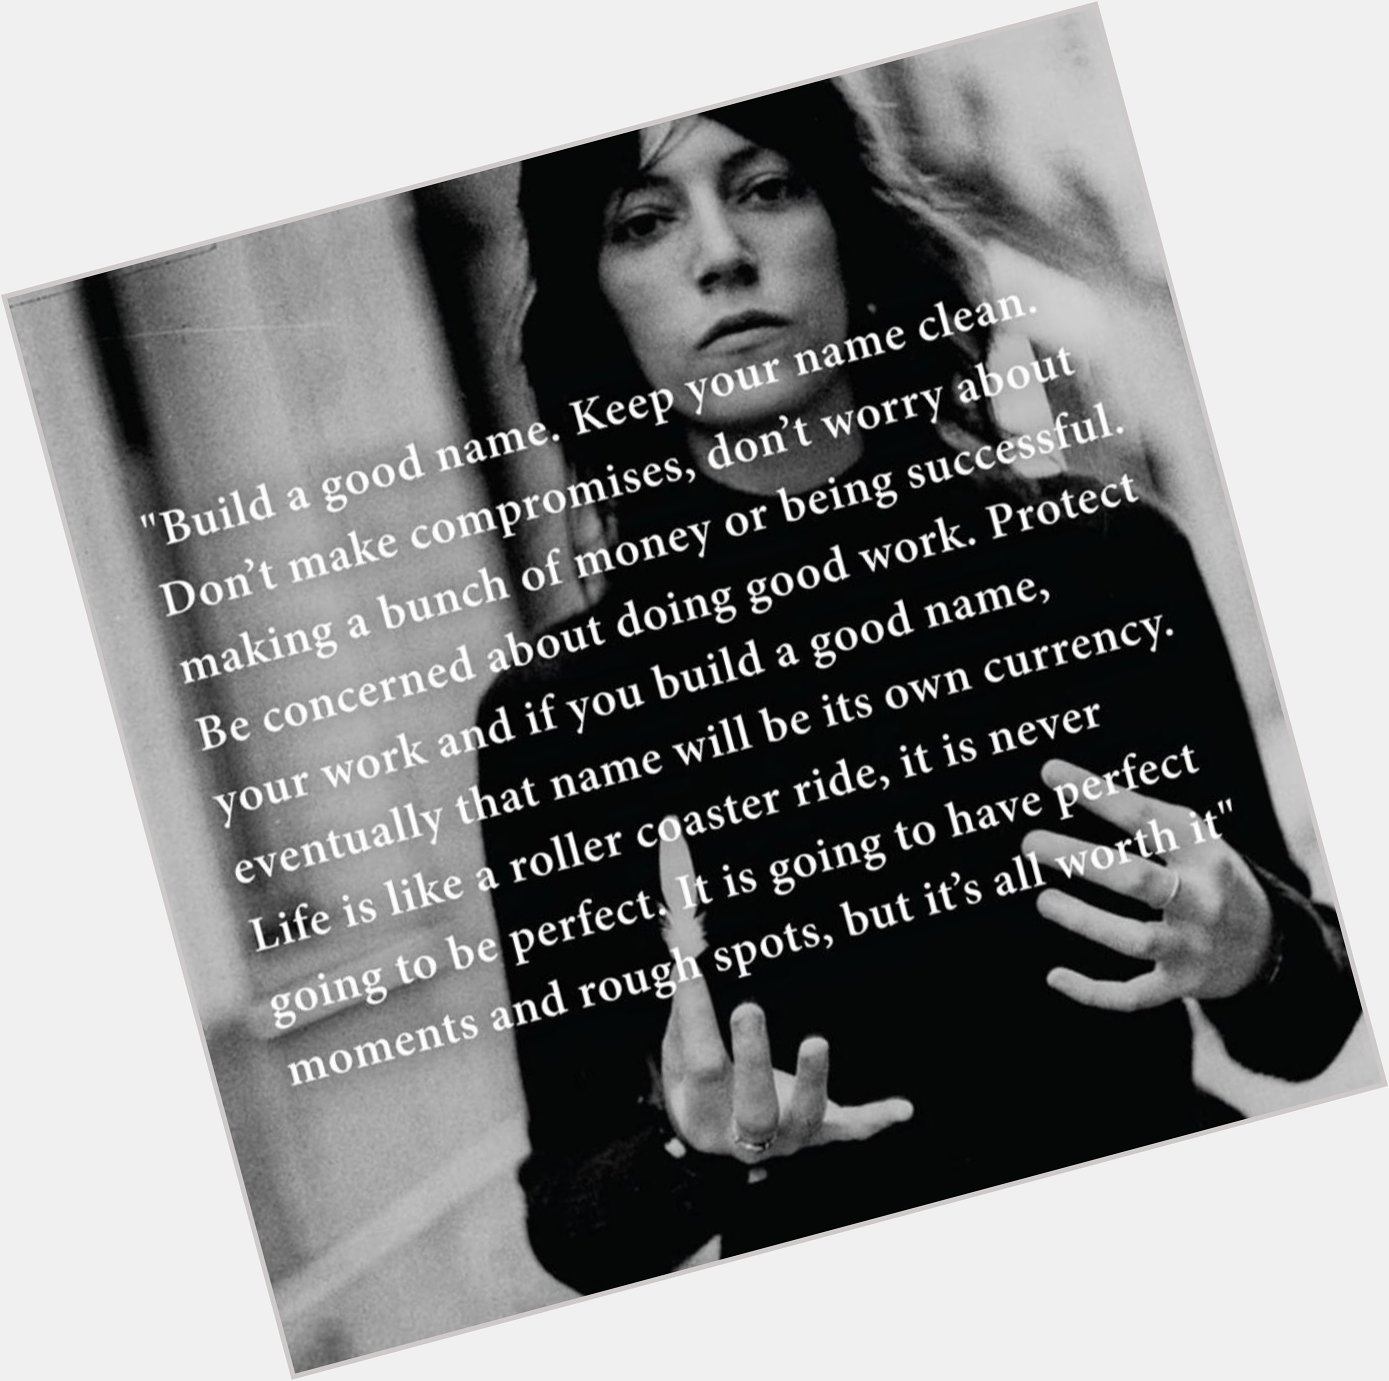 Happy 72nd birthday, Patti Smith.
You are a true force 